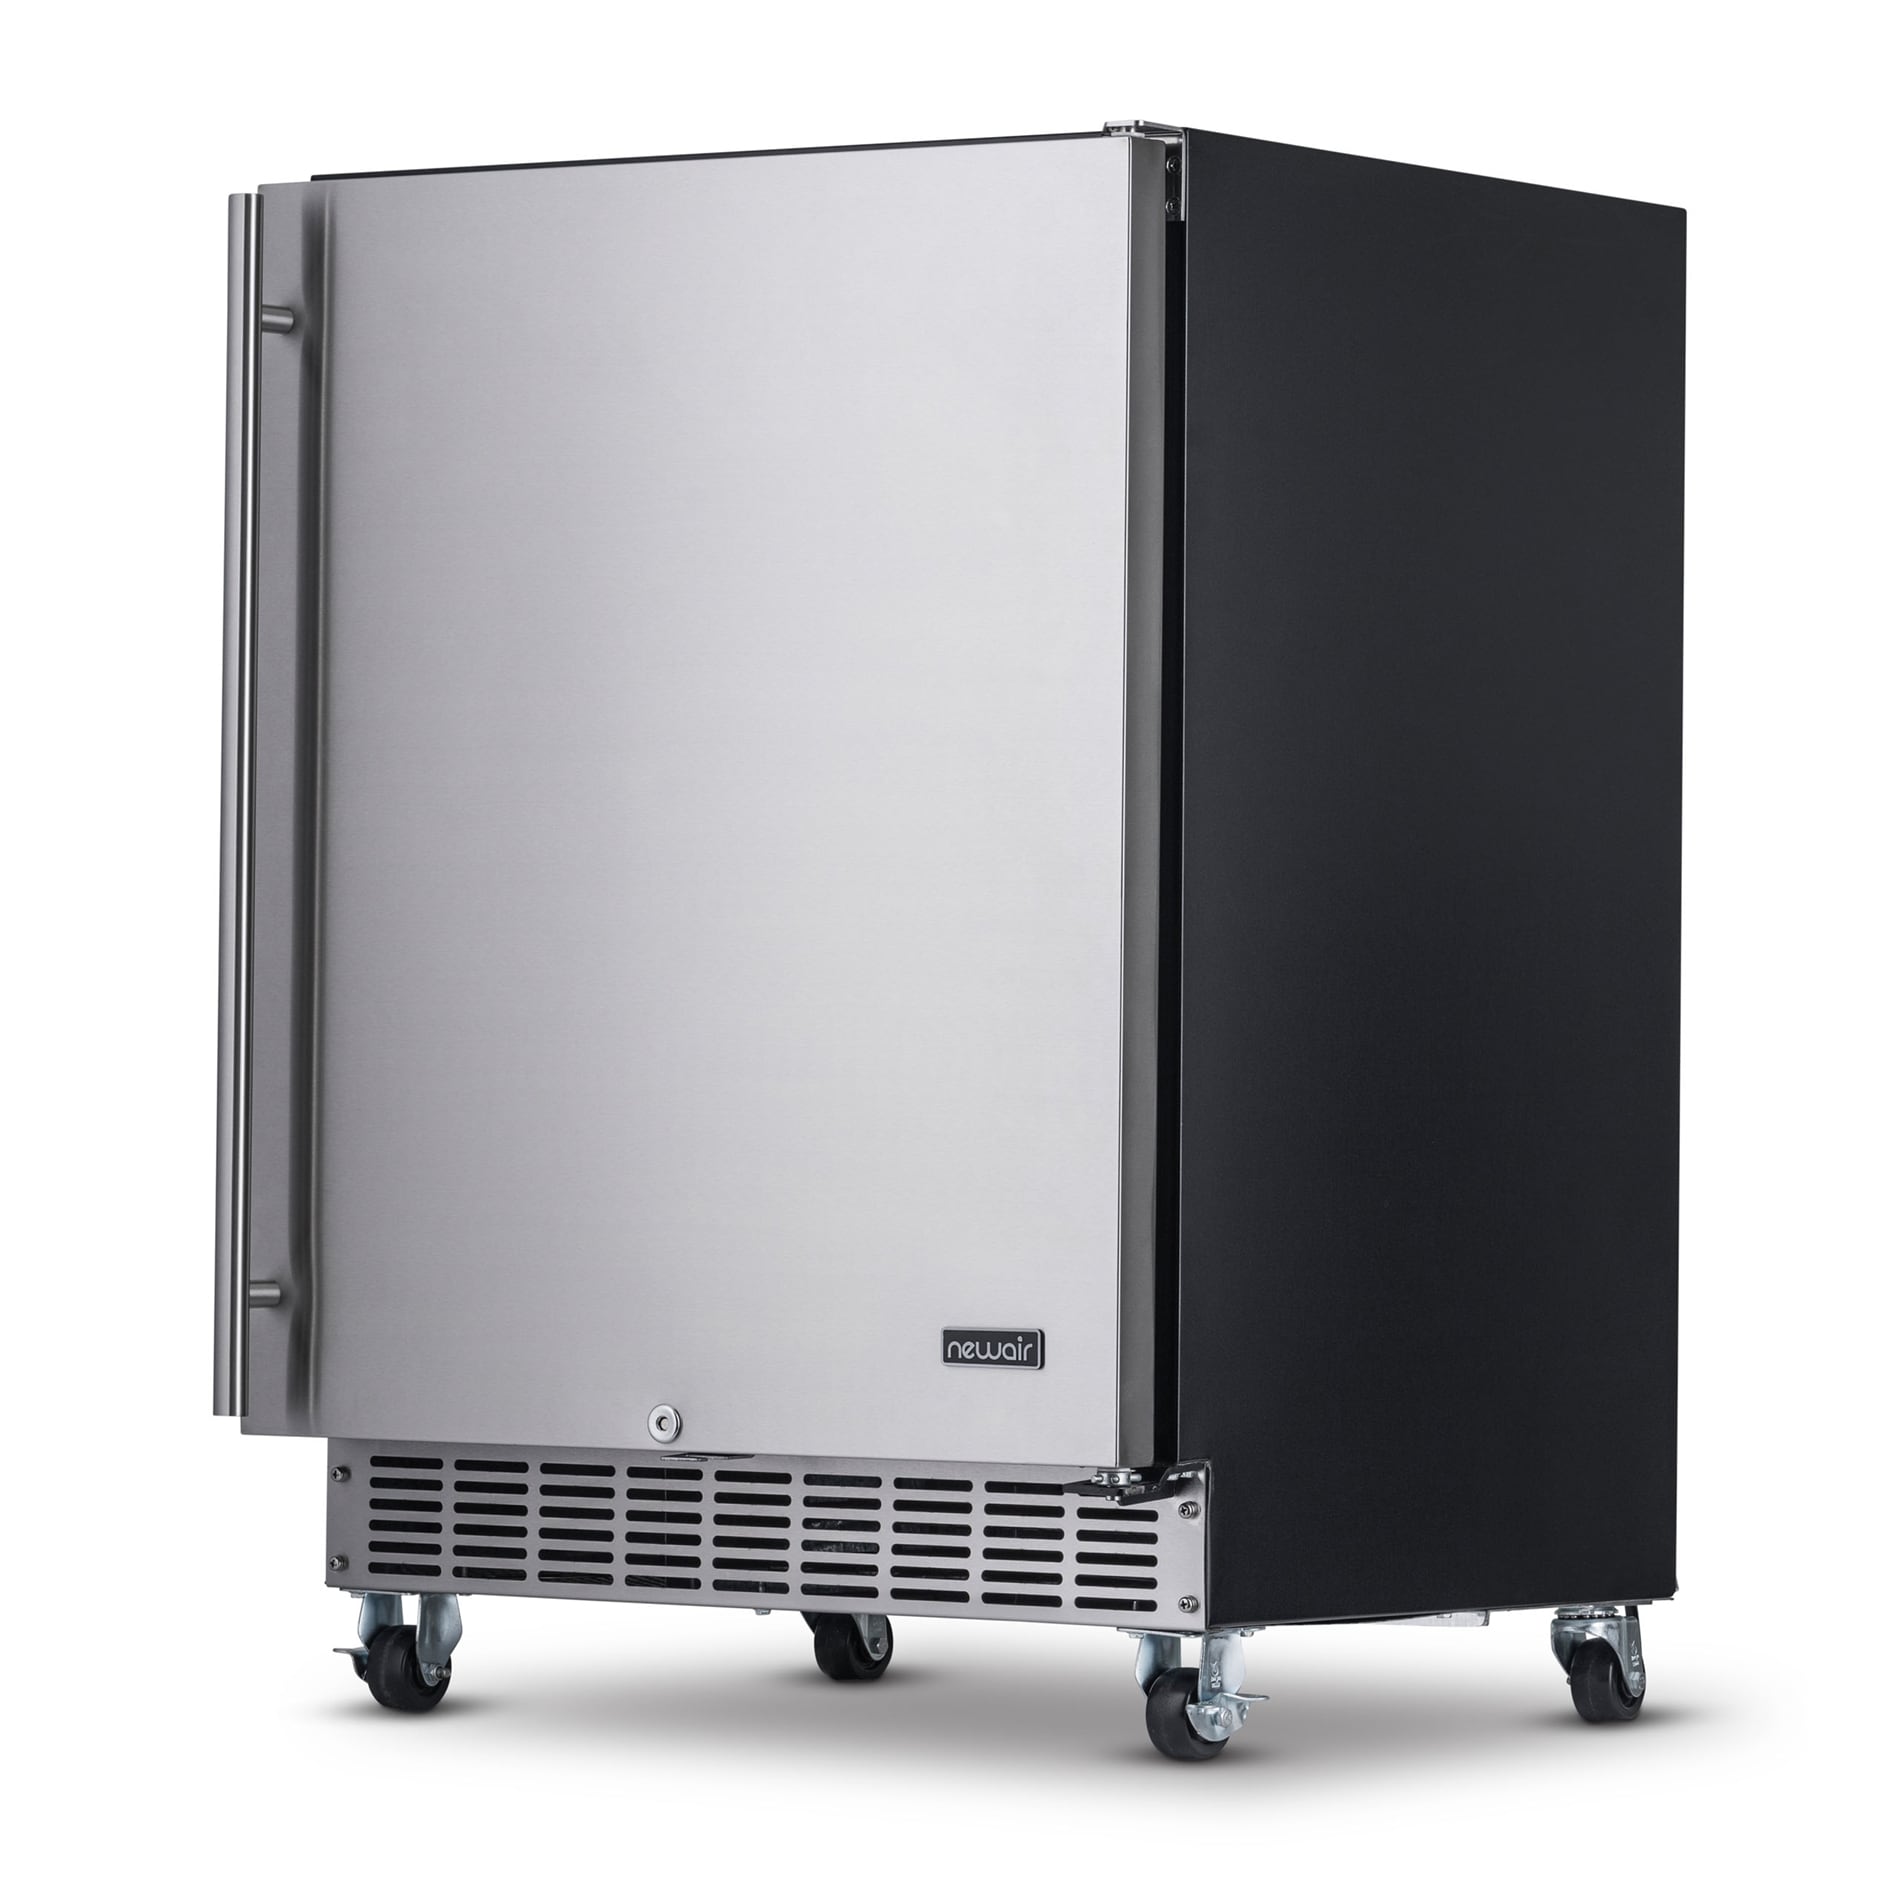 NewAir 15 3.2 Cu. ft. Commercial Stainless Steel Built-In Beverage Refrigerator, Weatherproof and Outdoor Rated